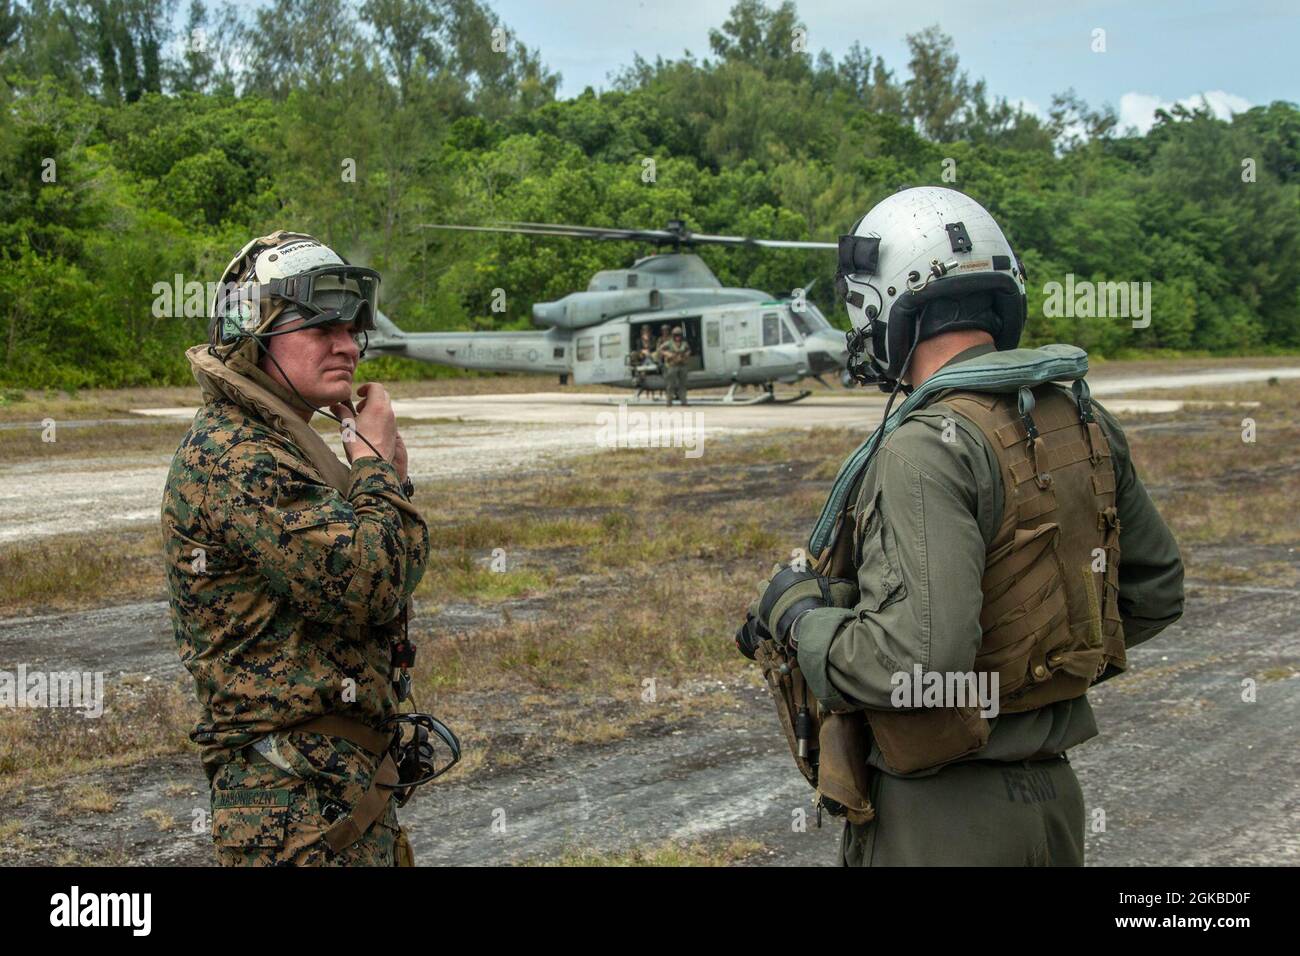 U.S. Marine Corps Col. Michael Nakonieczny, 31st Marine Expeditionary Unit (MEU) commanding officer, prepares to board a UH-1Y Huey with Marine Medium Tiltrotor Squadron 262 (Reinforced), on an airstrip on the Island of Peleliu, Republic of Palau, March 3, 2021. The 31st MEU is operating aboard ships of the Amphibious Squadron 11 in the 7th fleet area of operations to enhance interoperability with allies and partners and serve as a ready response force to defend peace and stability in the Indo-Pacific region. Stock Photo